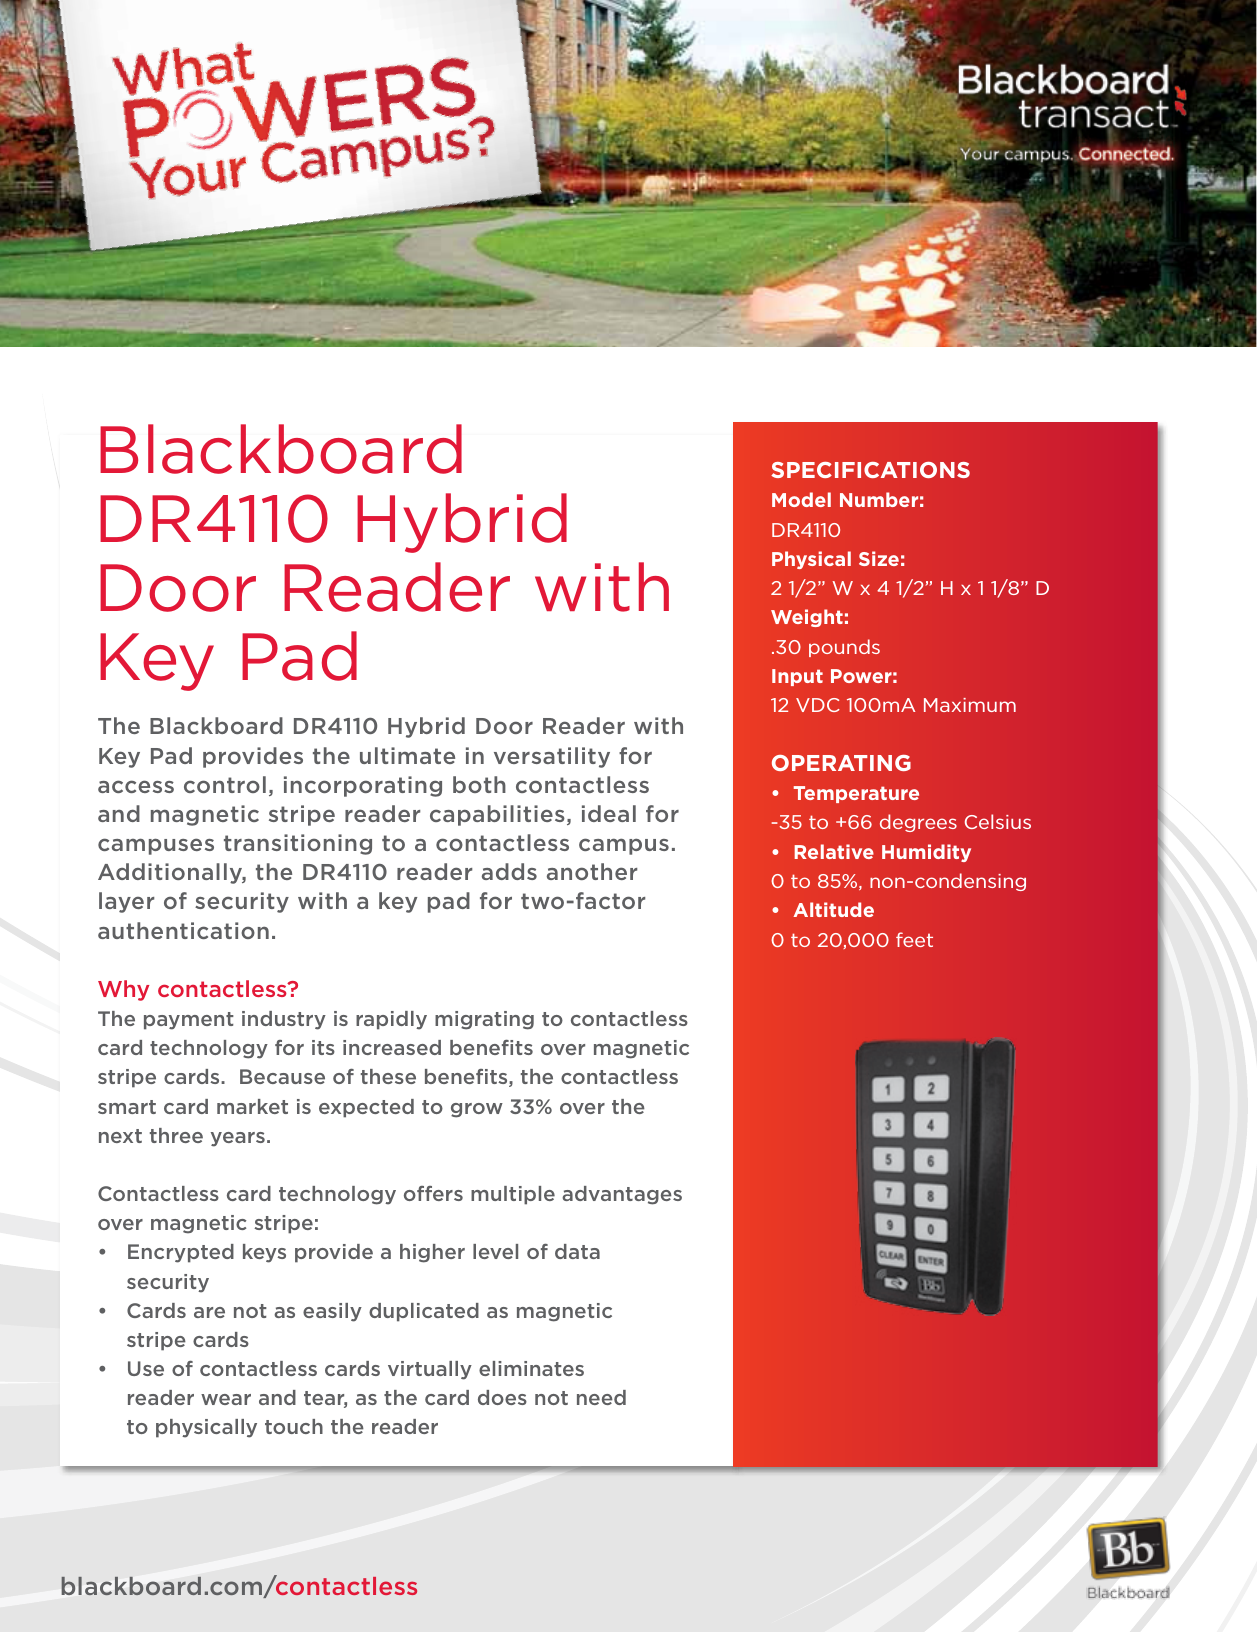 The Blackboard DR4110 Hybrid Door Reader with Key Pad provides the ultimate in versatility for access control, incorporating both contactless and magnetic stripe reader capabilities, ideal for campuses transitioning to a contactless campus.  Additionally, the DR4110 reader adds another layer of security with a key pad for two-factor authentication.Why contactless?The payment industry is rapidly migrating to contactless card technology for its increased beneﬁts over magnetic stripe cards.  Because of these beneﬁts, the contactless smart card market is expected to grow 33% over the next three years.Contactless card technology offers multiple advantages over magnetic stripe:• Encryptedkeysprovideahigherlevelofdata security• Cardsarenotaseasilyduplicatedasmagnetic  stripe cards• Useofcontactlesscardsvirtuallyeliminates   reader wear and tear, as the card does not need          to physically touch the readerSPECIFICATIONSModel Number:DR4110Physical Size: 2 1/2” W x 4 1/2” H x 1 1/8” DWeight: .30 poundsInput Power:12 VDC 100mA MaximumOPERATING• Temperature-35 to +66 degrees Celsius• RelativeHumidity0 to 85%, non-condensing• Altitude0 to 20,000 feetblackboard.com/contactlessBlackboard DR4110 Hybrid Door Reader with Key Pad